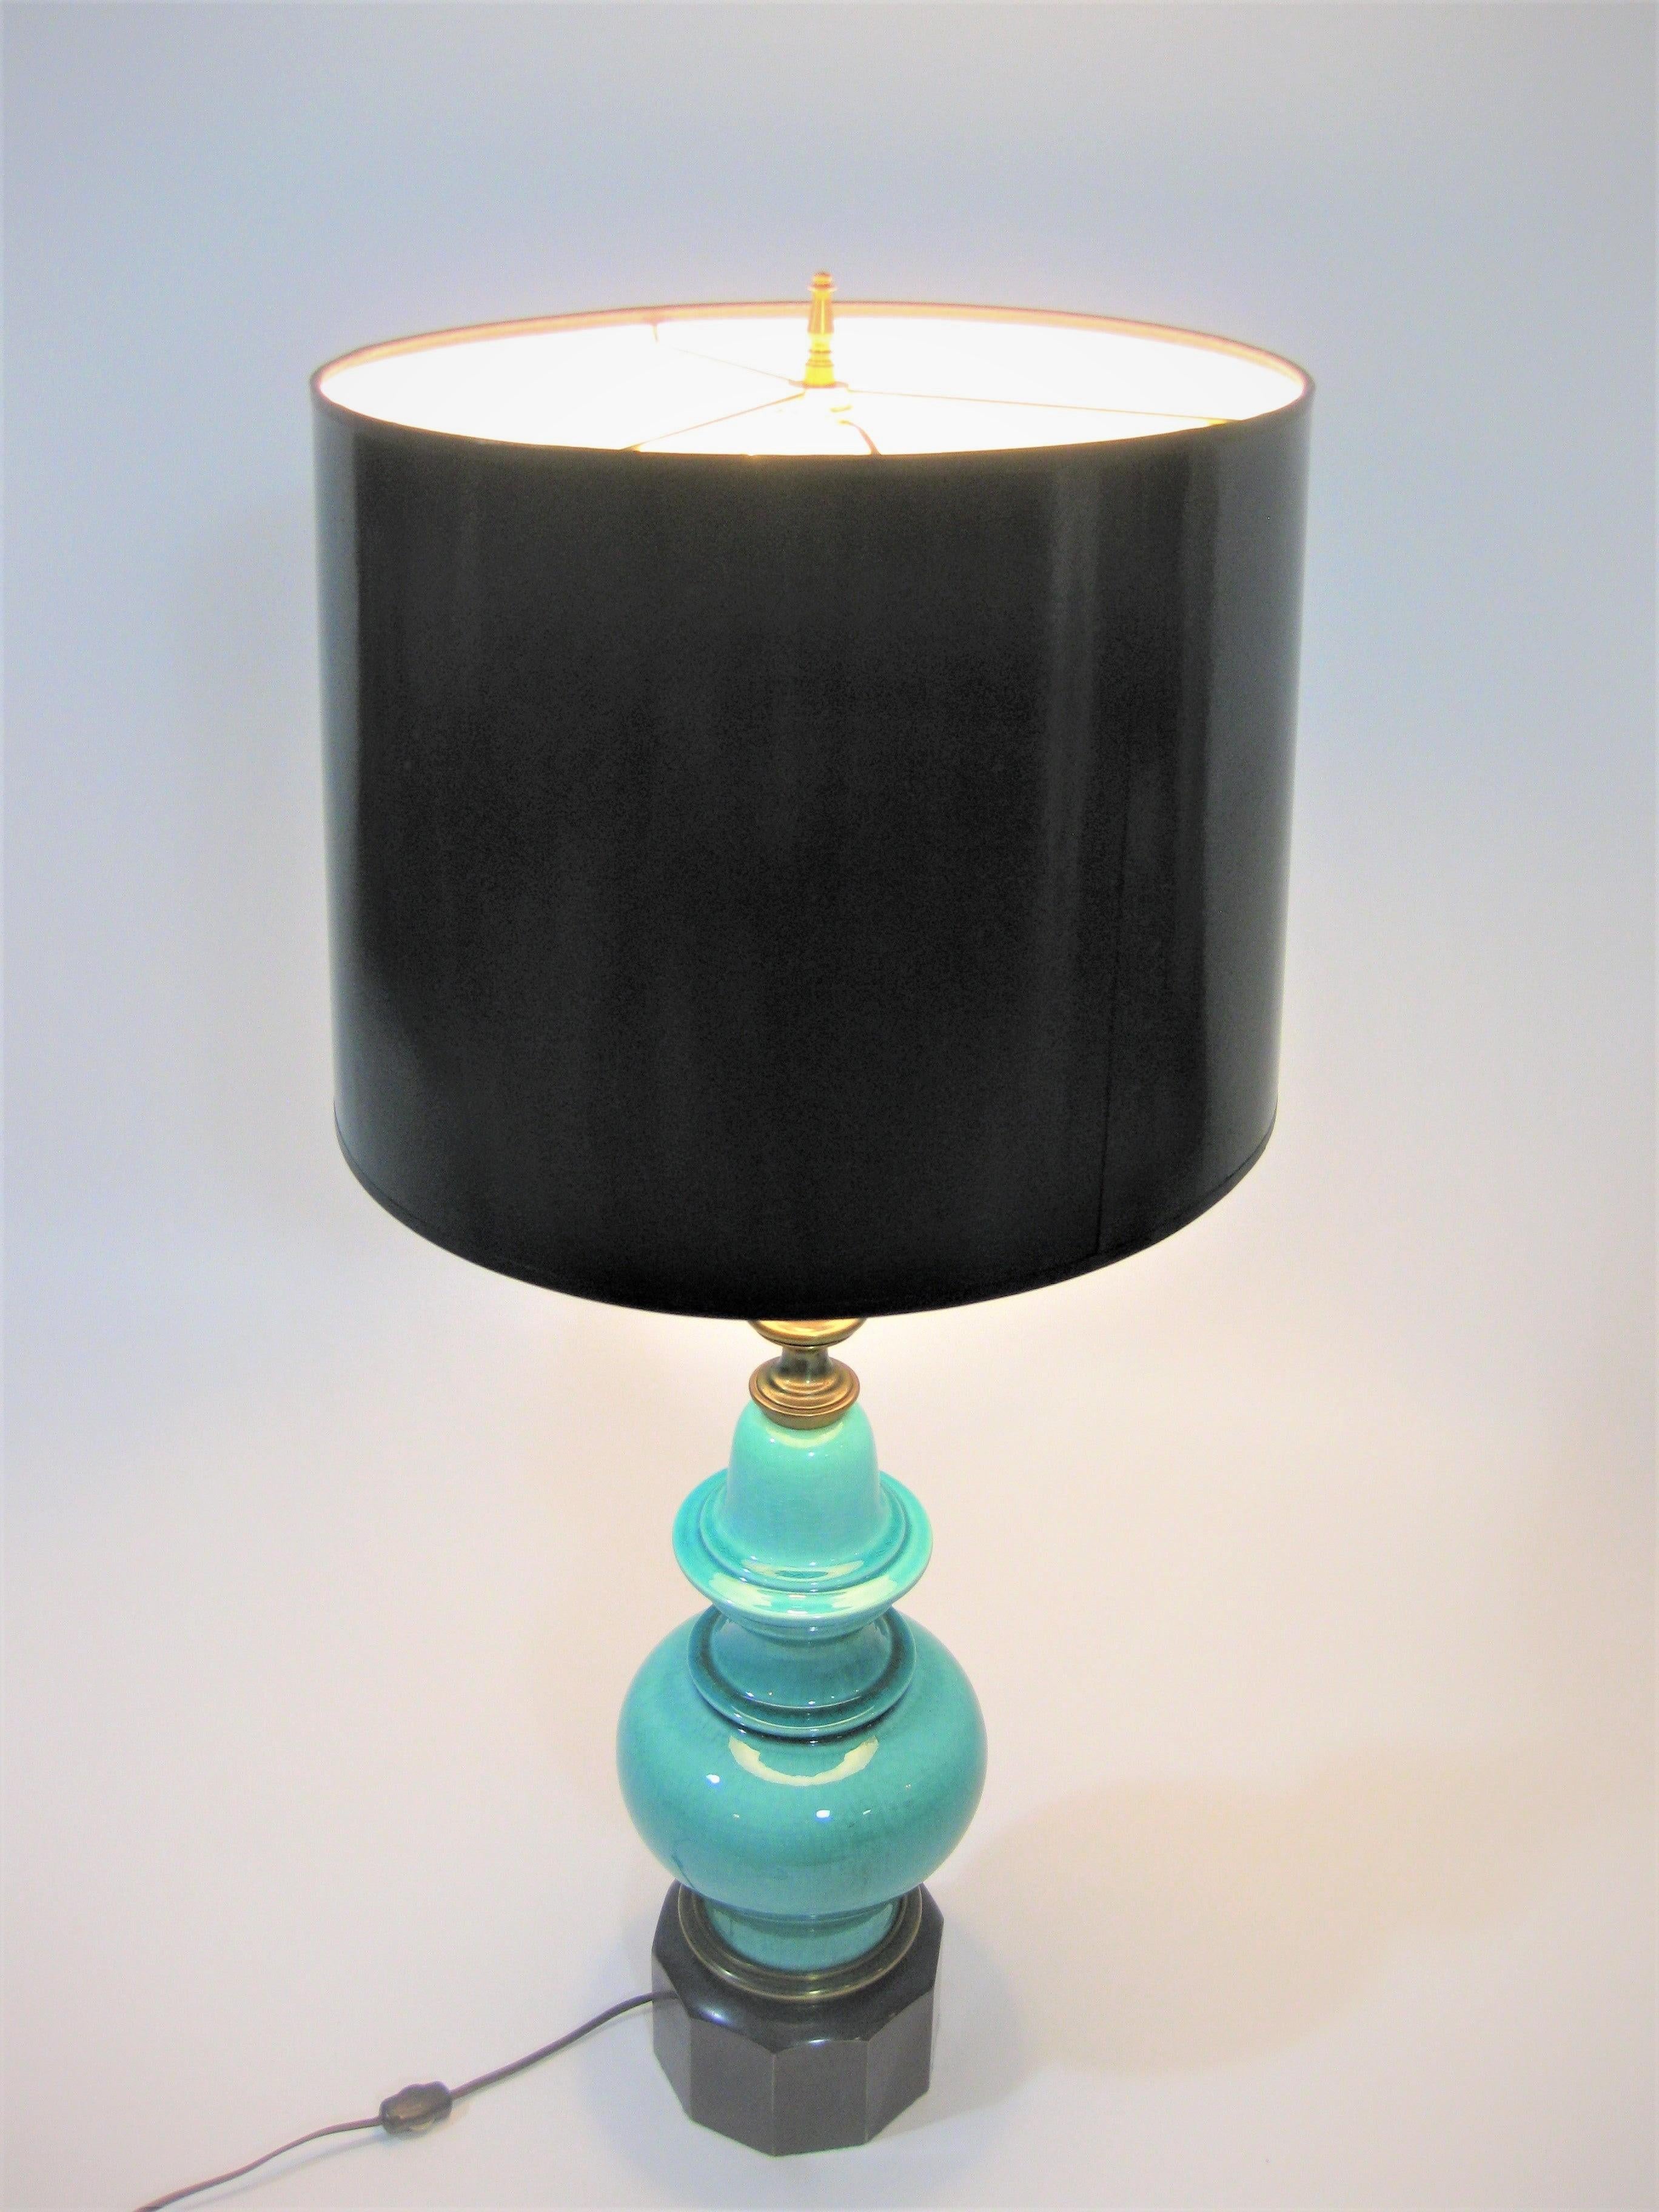 1950s Stiffel Lamp Turquoise Crackle Glaze Ceramic and Brass In Excellent Condition For Sale In New York, NY